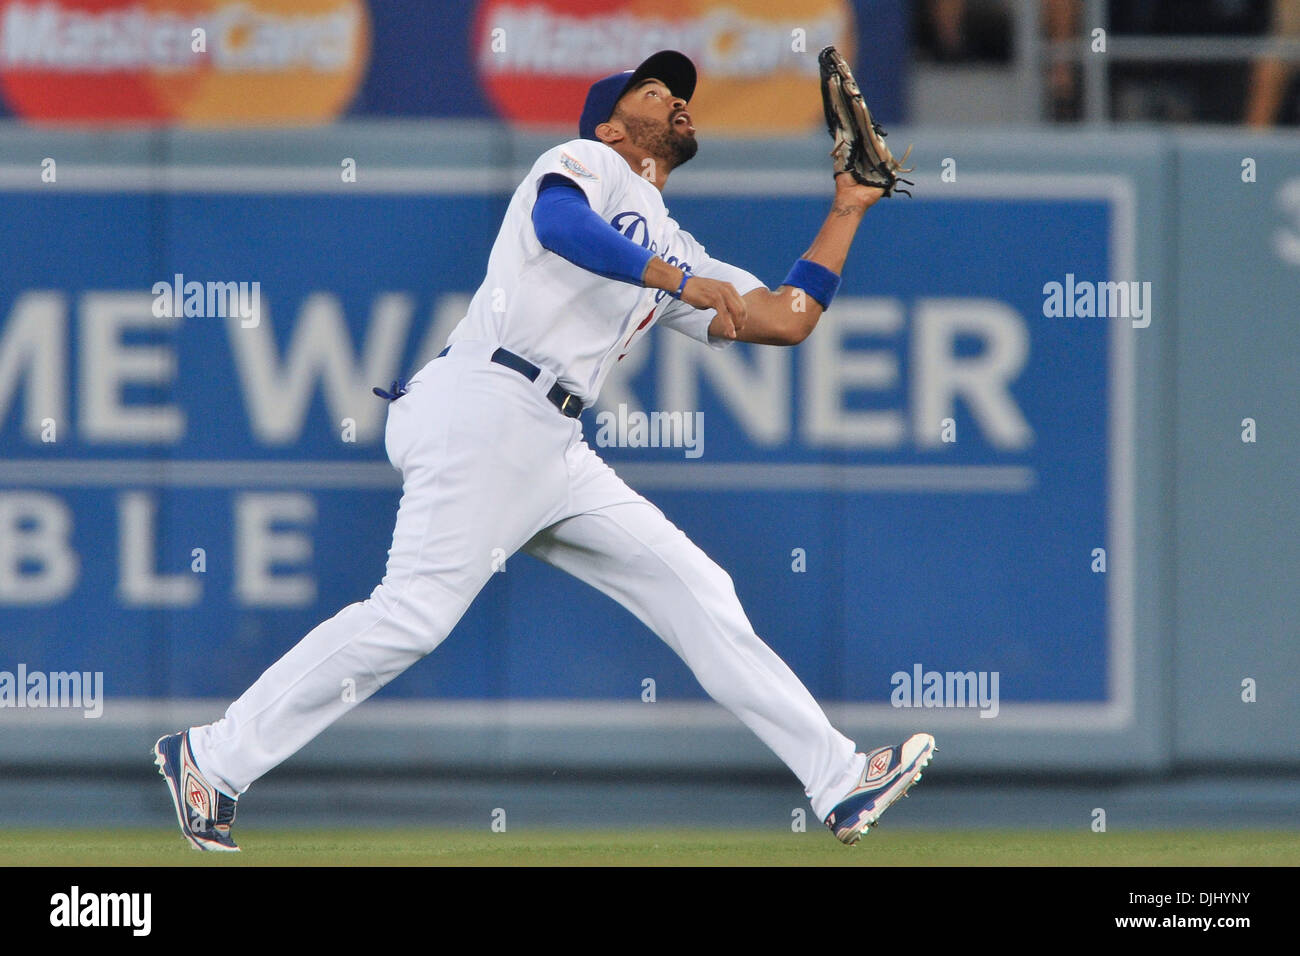 Aug. 04, 2010 - Los Angeles, California, United States of America - 4 August 2010: Los Angeles Dodgers center fielder Matt Kemp (27) comes in to make a catch. The San Diego Padres were shutout by the Los Angeles Dodgers by a score of 9-0 at Dodger Stadium in Los Angeles,. California..Mandatory Credit: Andrew Fielding / Southcreek Global (Credit Image: © Southcreek Global/ZUMApress. Stock Photo